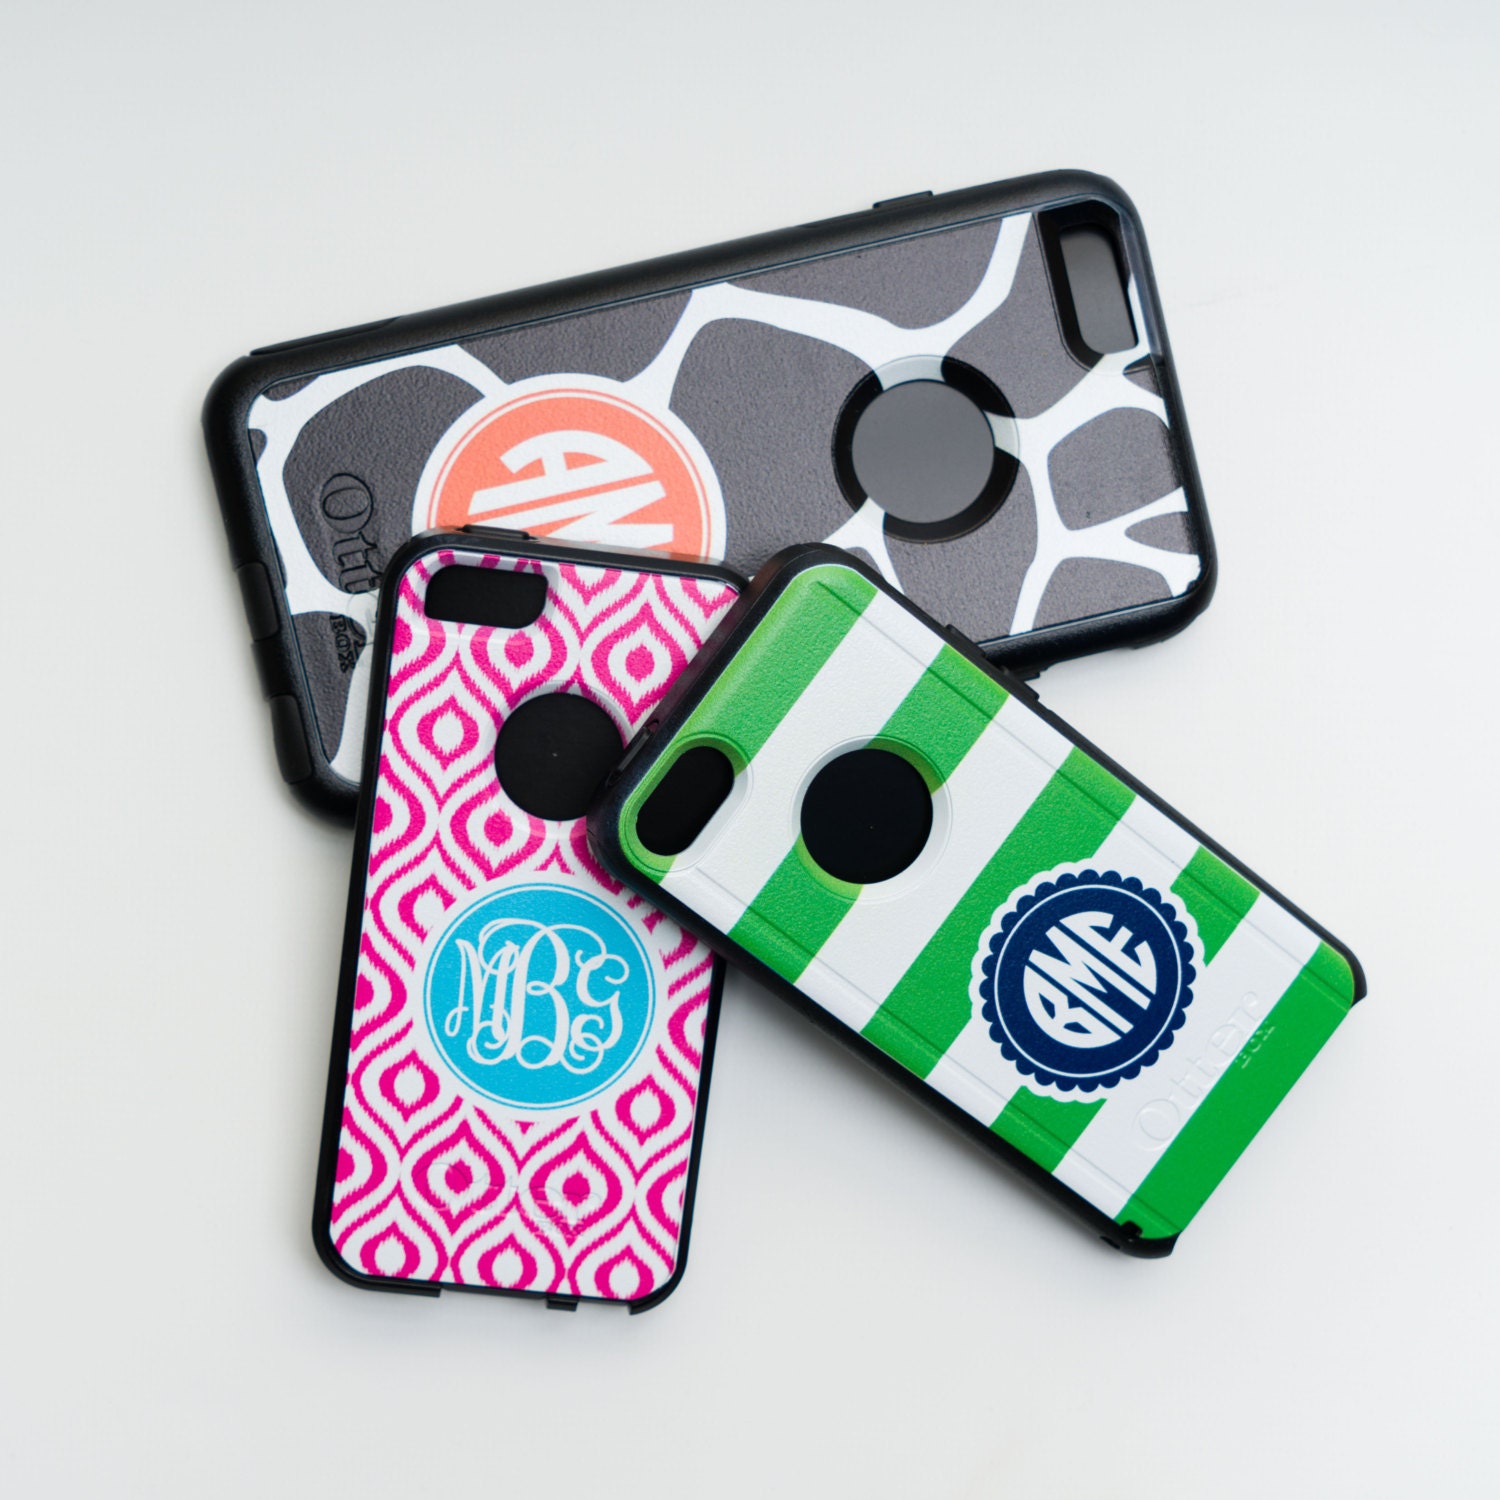 Monogram iPhone Cases: Personalize Your Phone with Style and Flair!